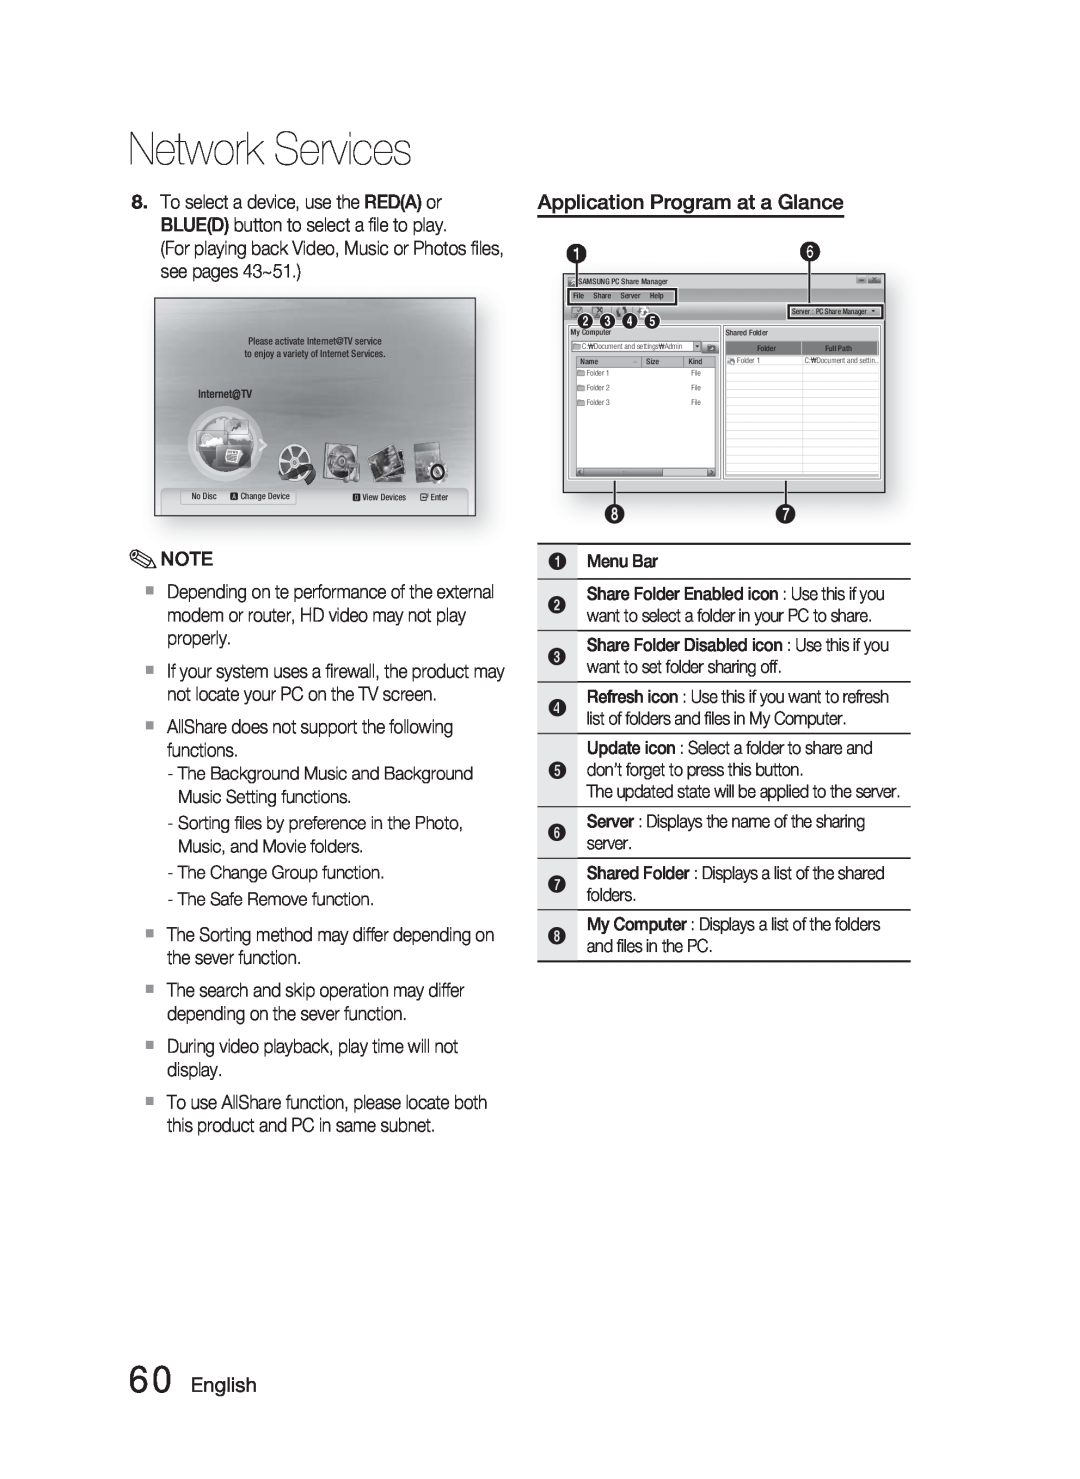 Samsung HT-C5500 user manual Application Program at a Glance, English, Network Services 